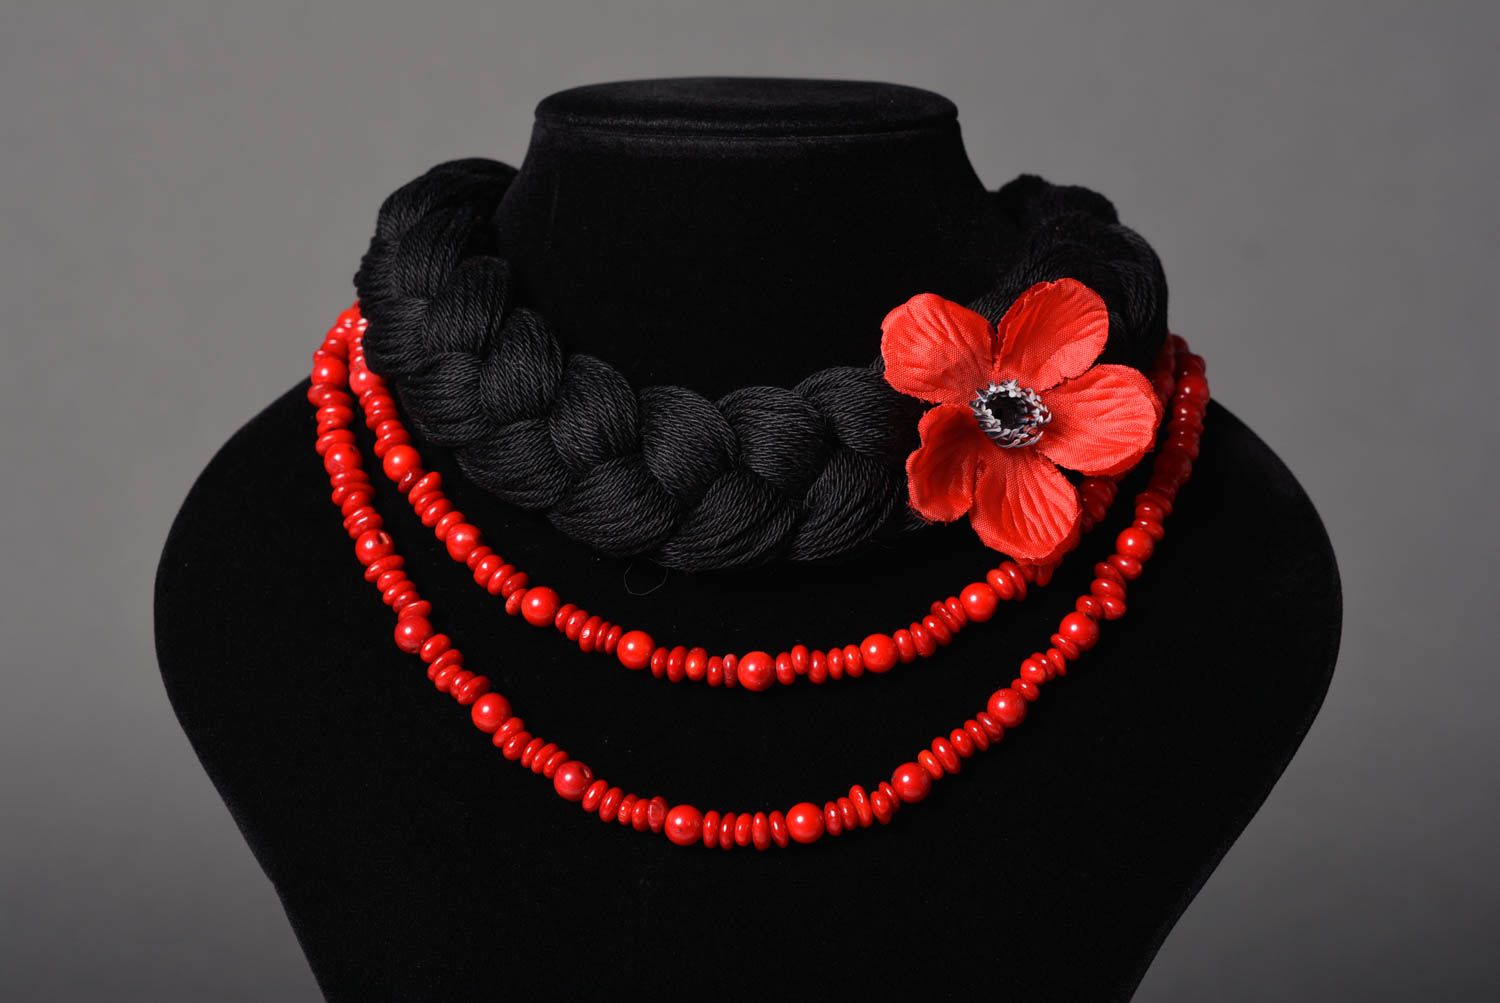 Handmade necklace designer jewelry braided necklace fashion accessories for girl photo 1